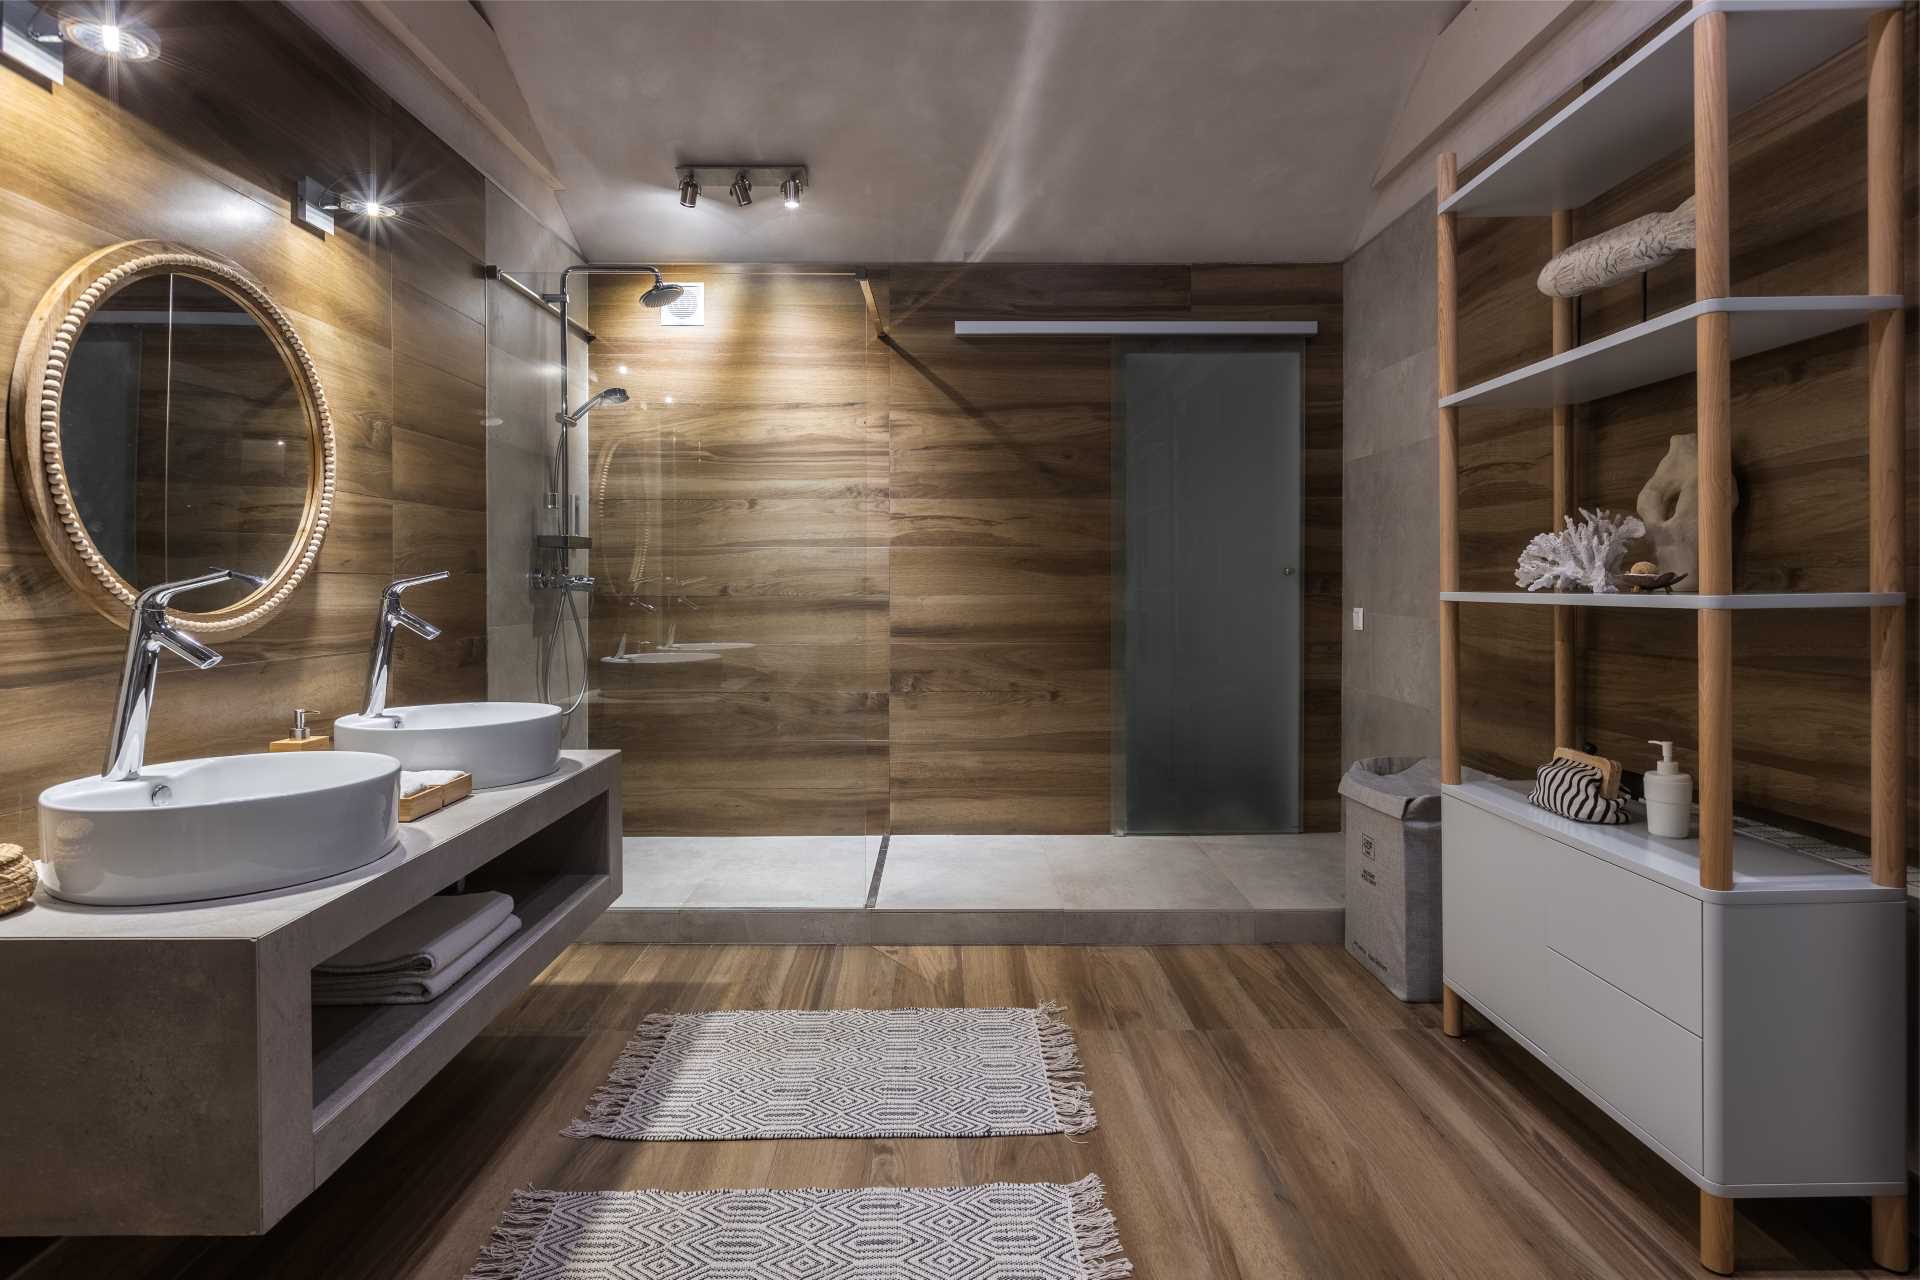 In this bathroom, wood finishes create a cozy ambiance.